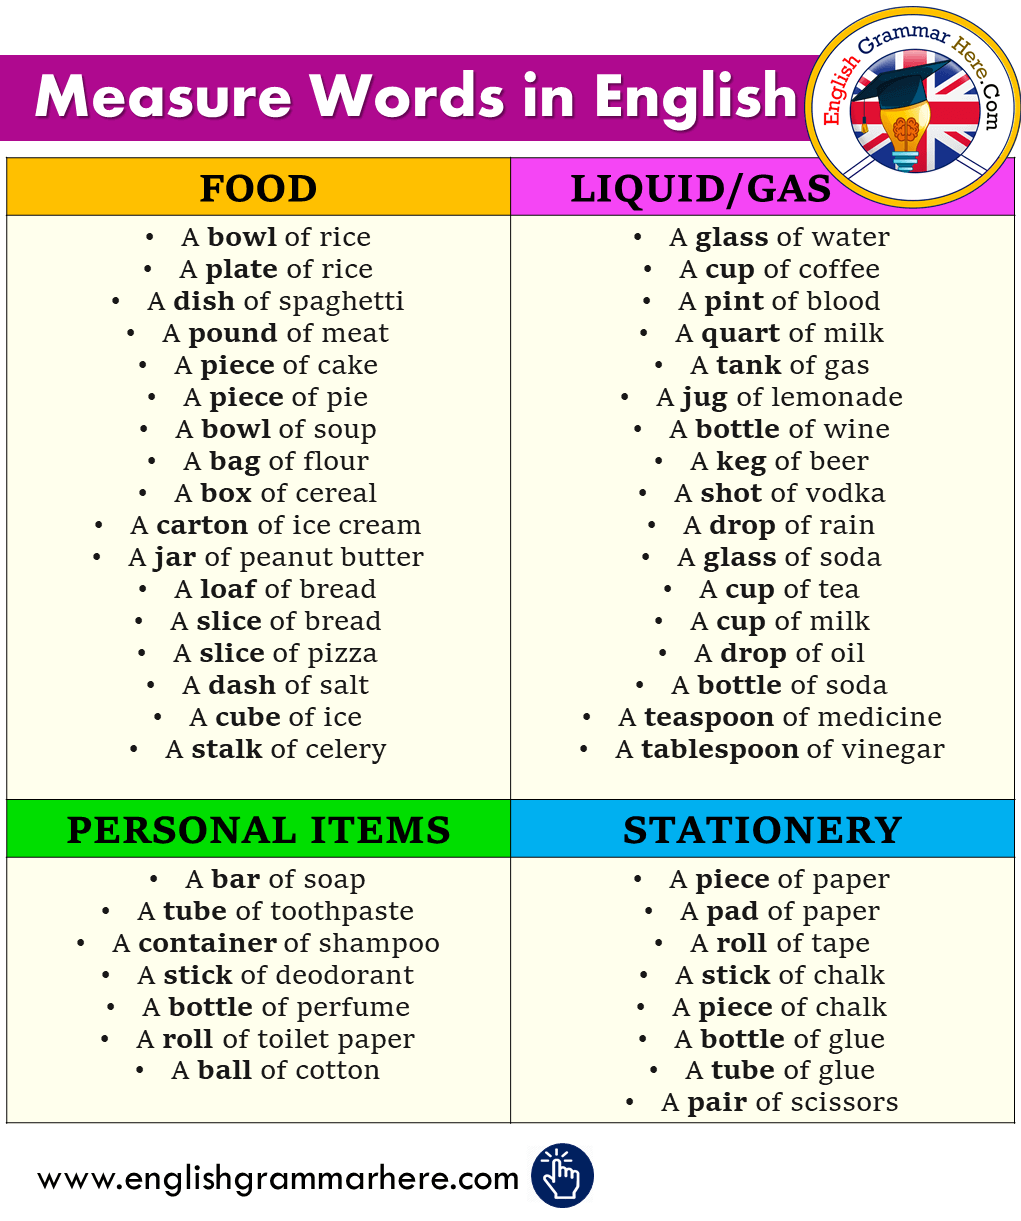 English Measure Words List About Food, Liquid,Gas, Personal Items, Stationery